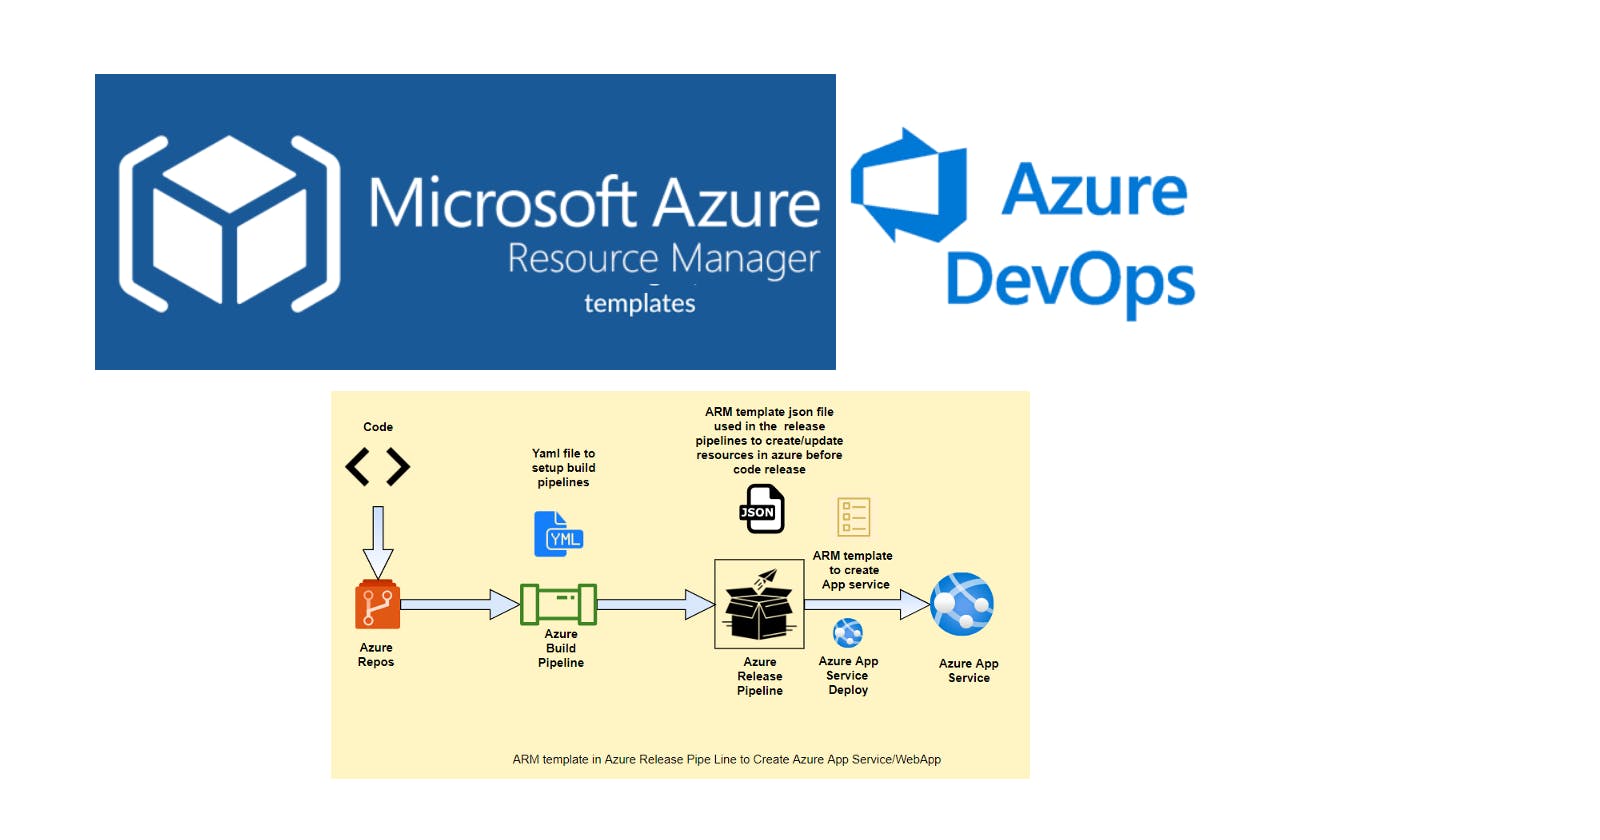 Use ARM template to automate the creation of Azure App service during Release Pipeline